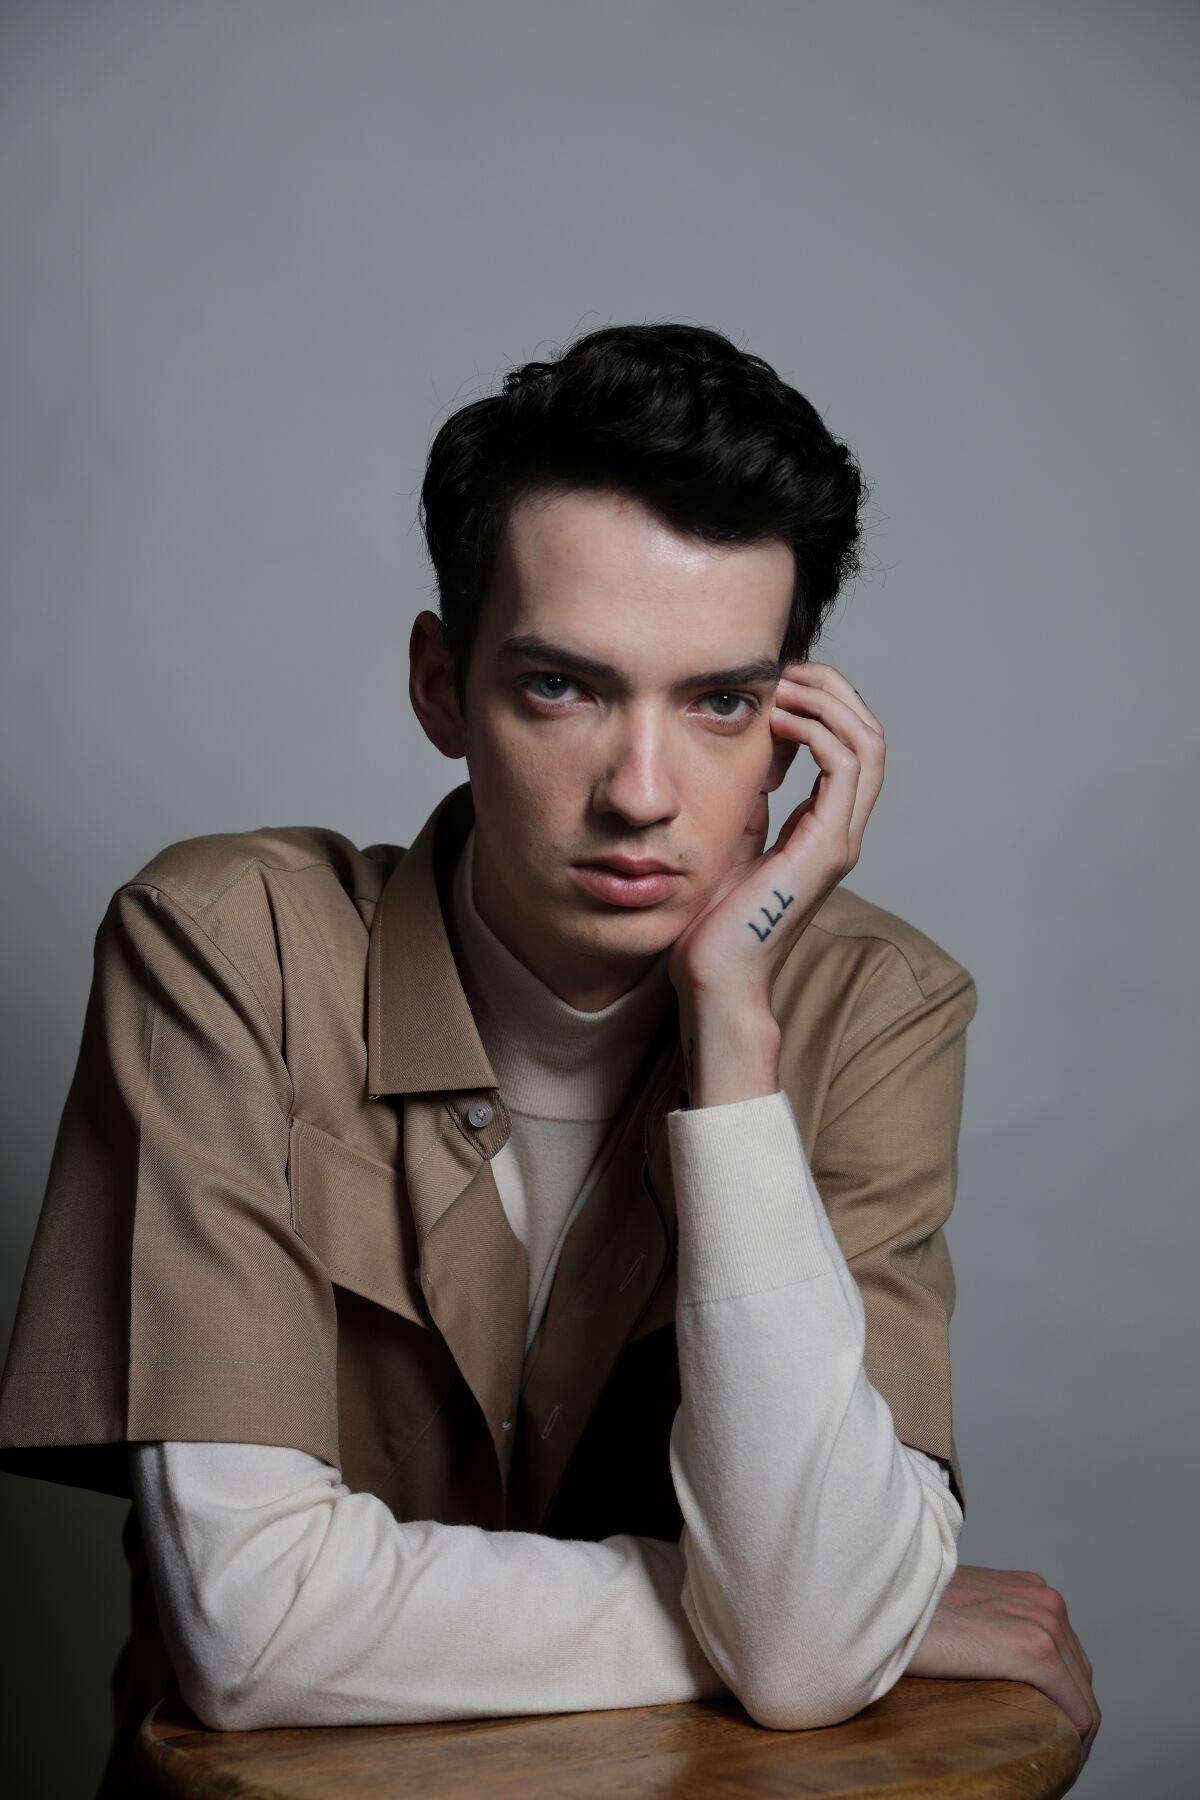 Kodi Smit-McPhee from "The Power of the Dog."